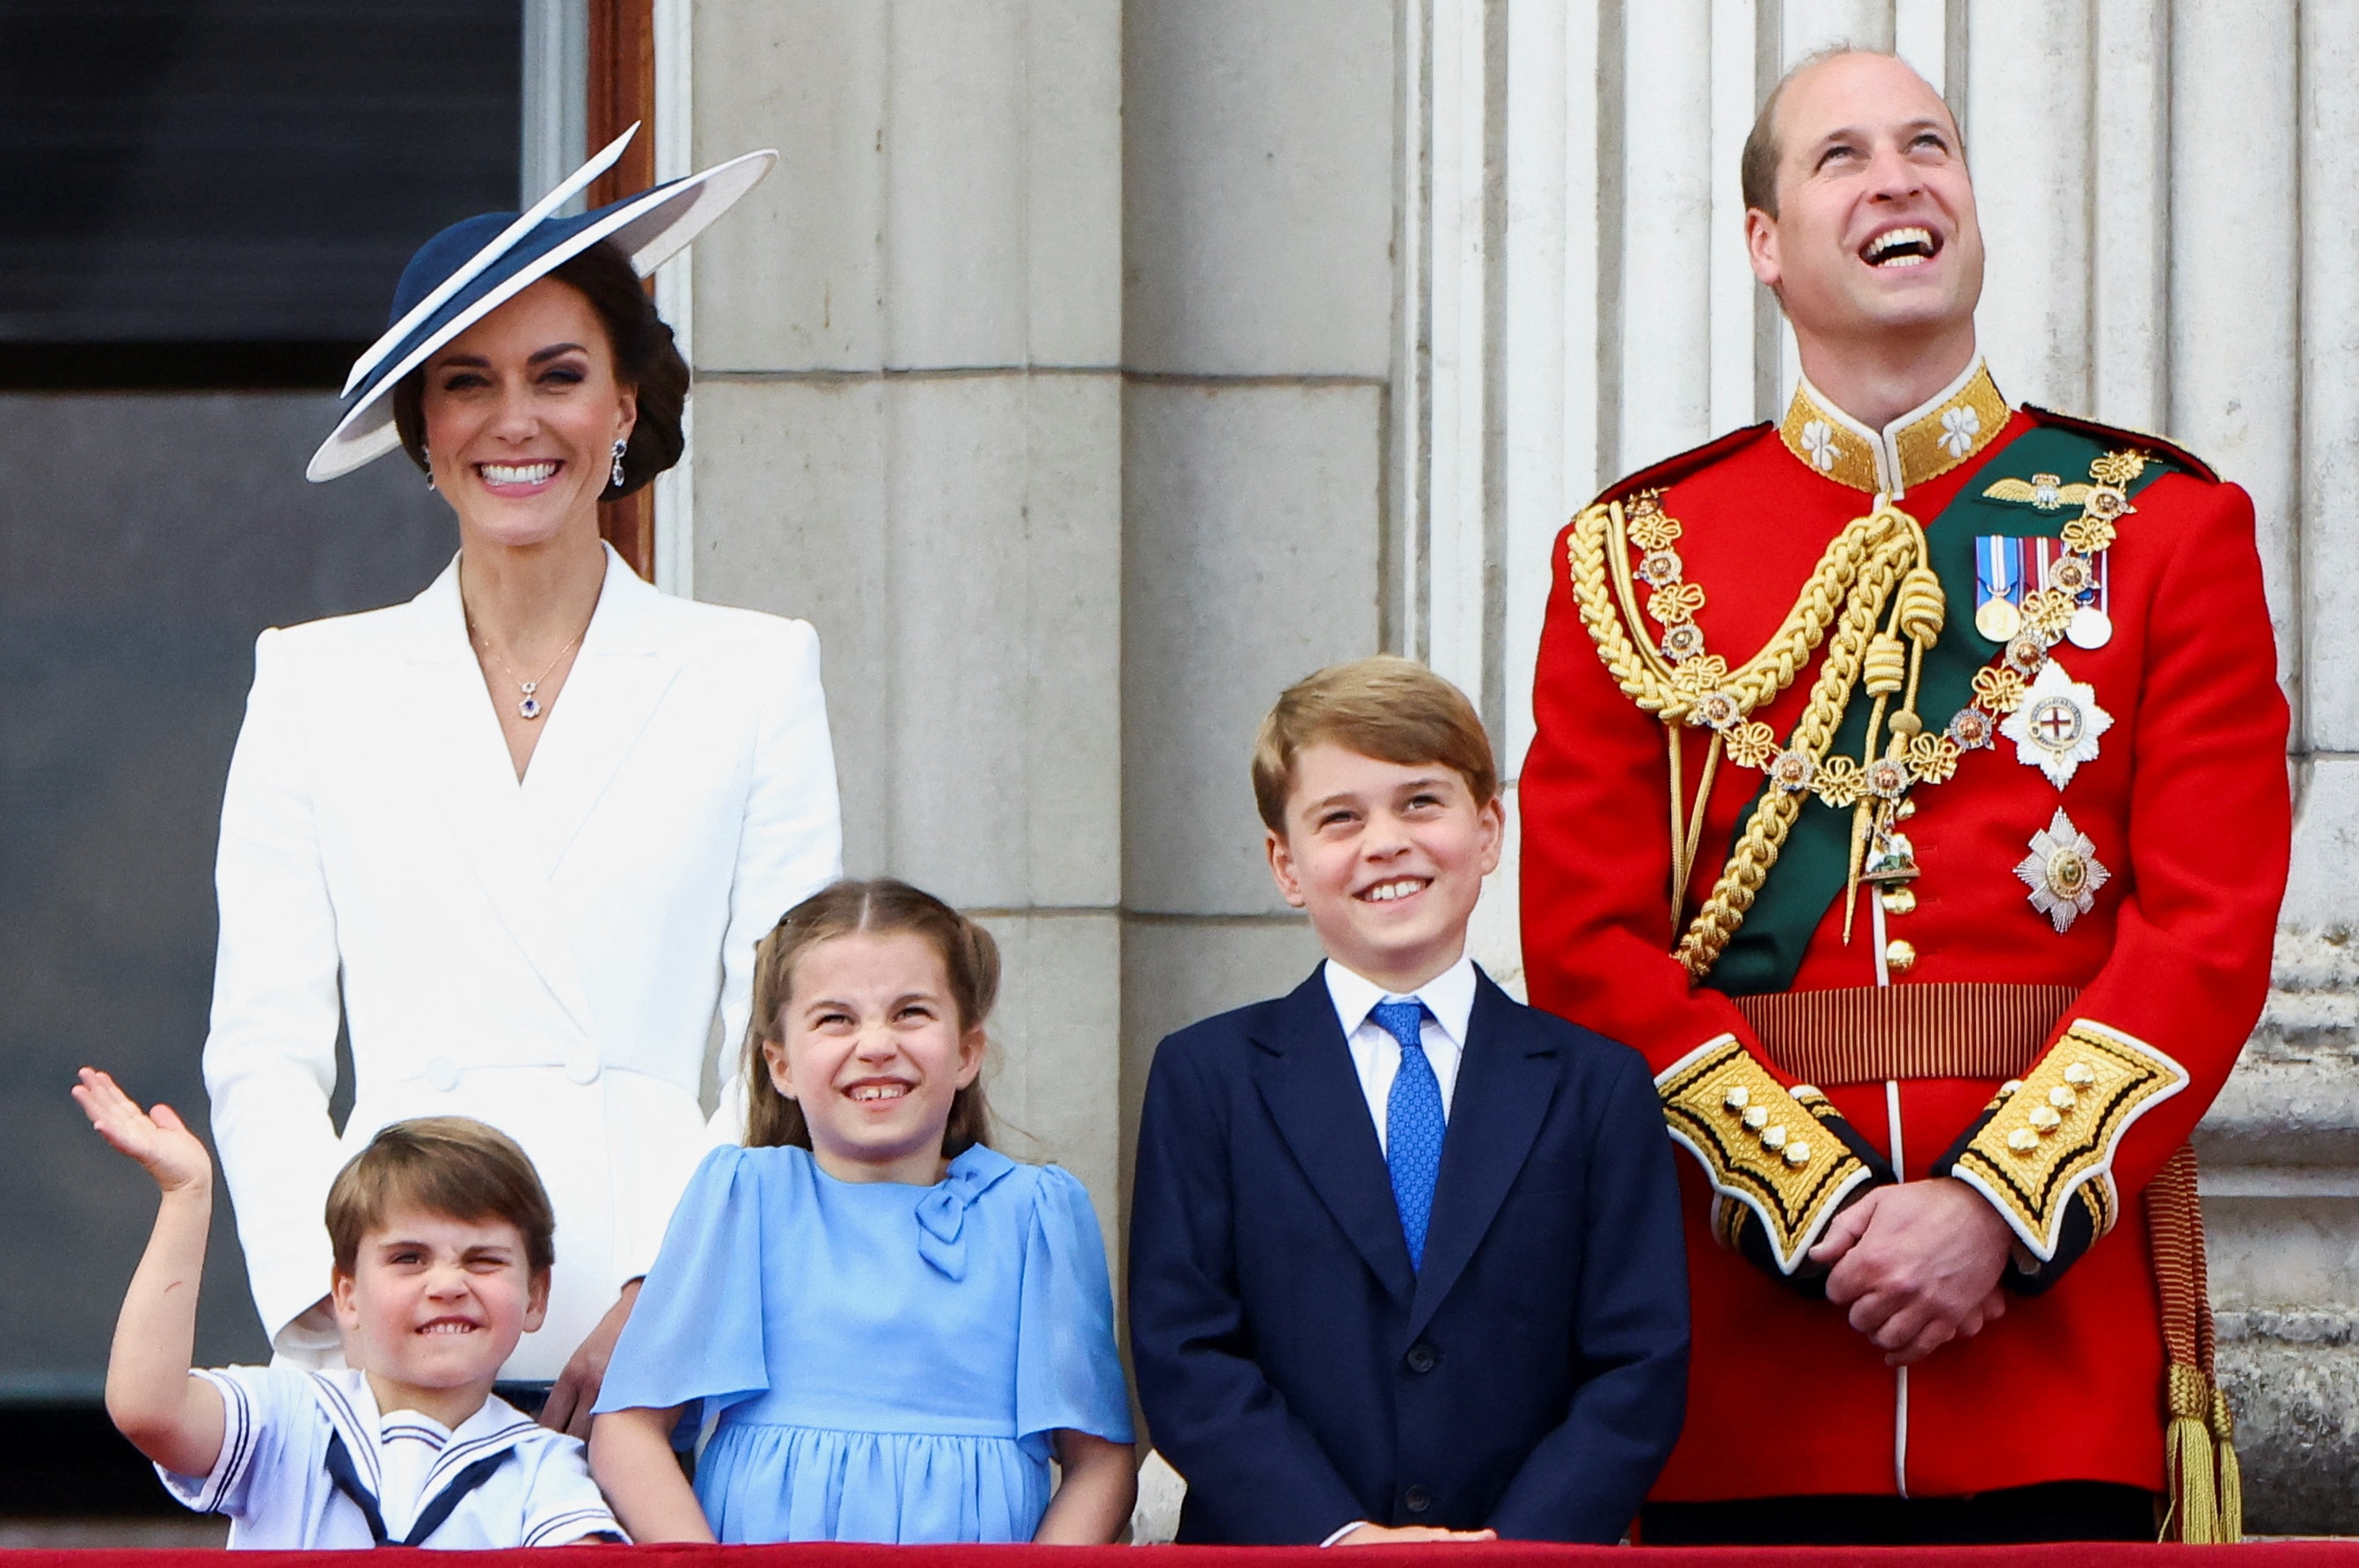 Prince William and Kate Middleton with their kids Princess Charlotte, Prince George and Prince Louis(Reuters)